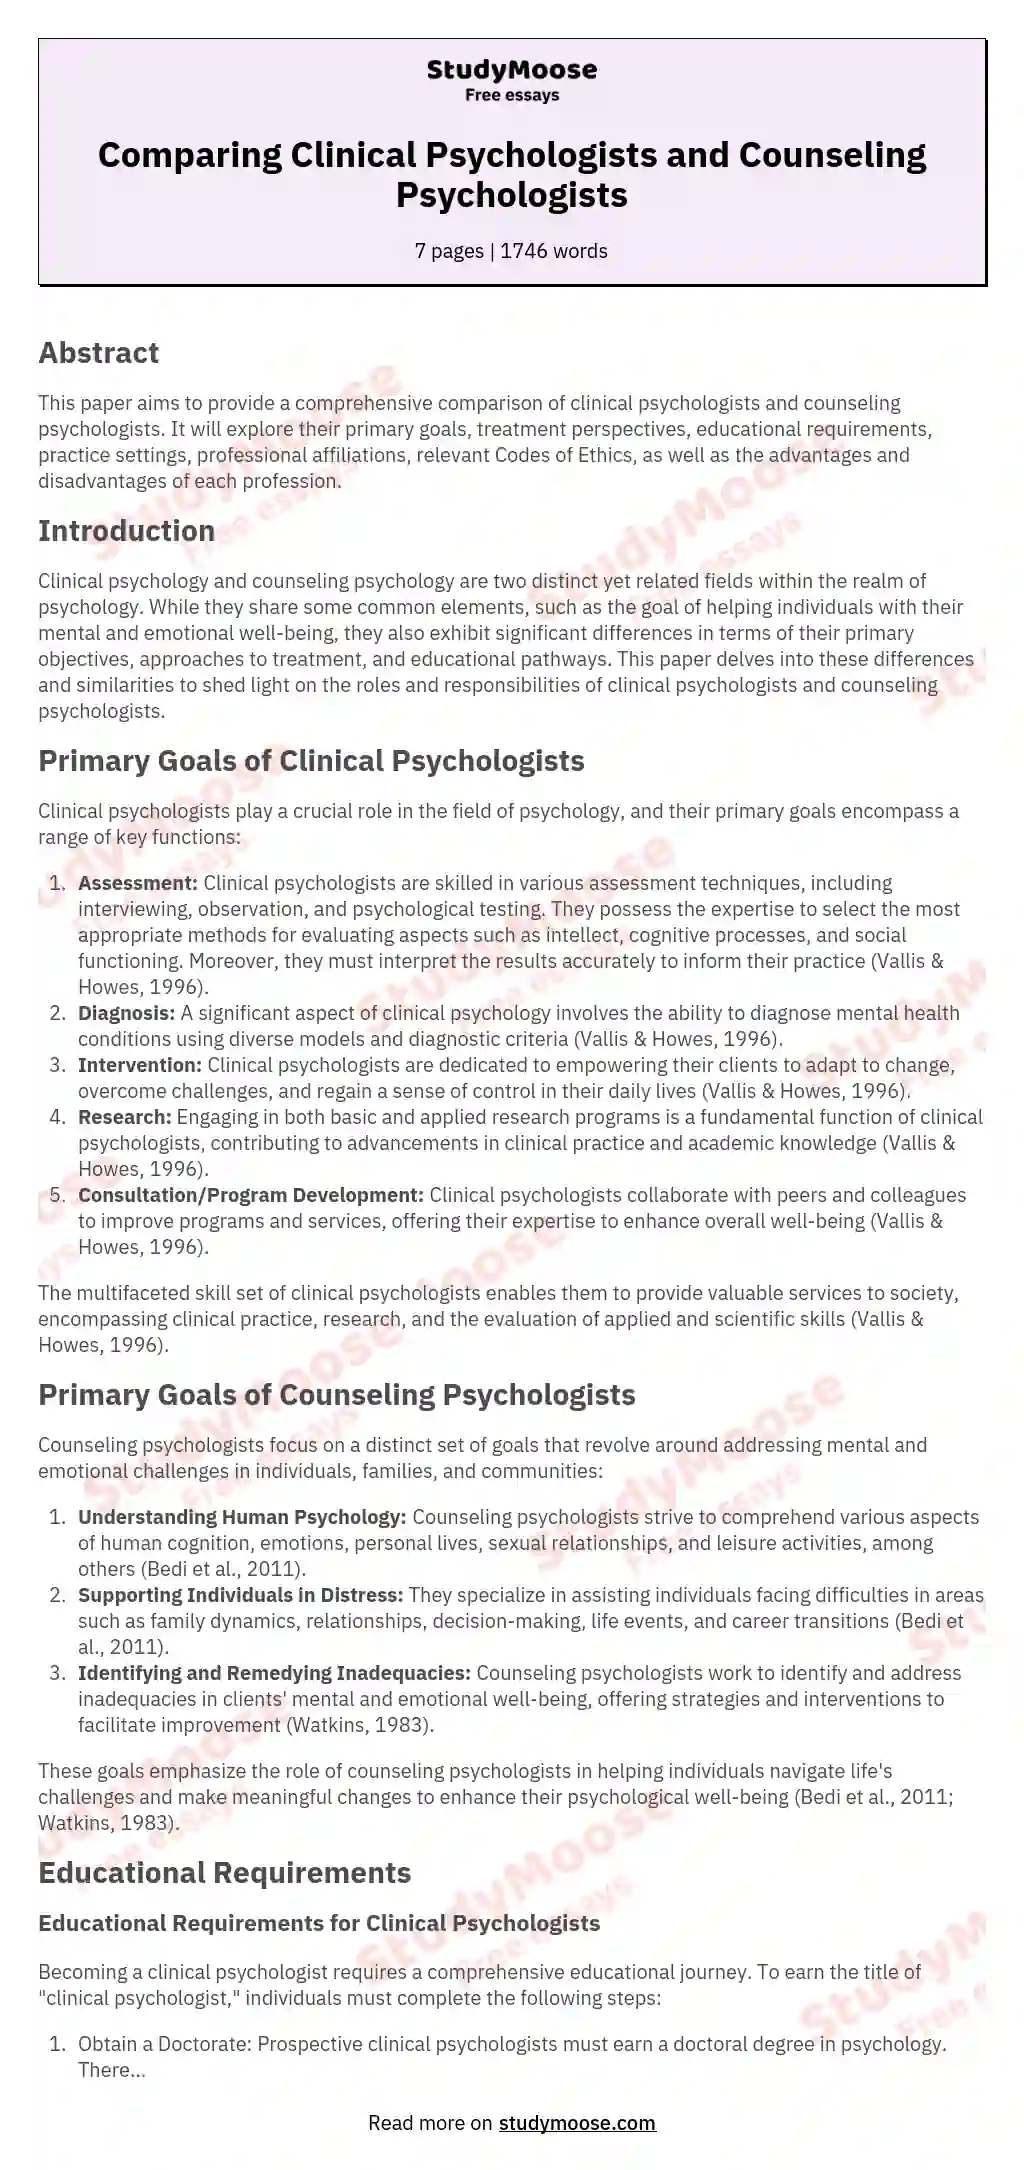 Comparing Clinical Psychologists and Counseling Psychologists essay